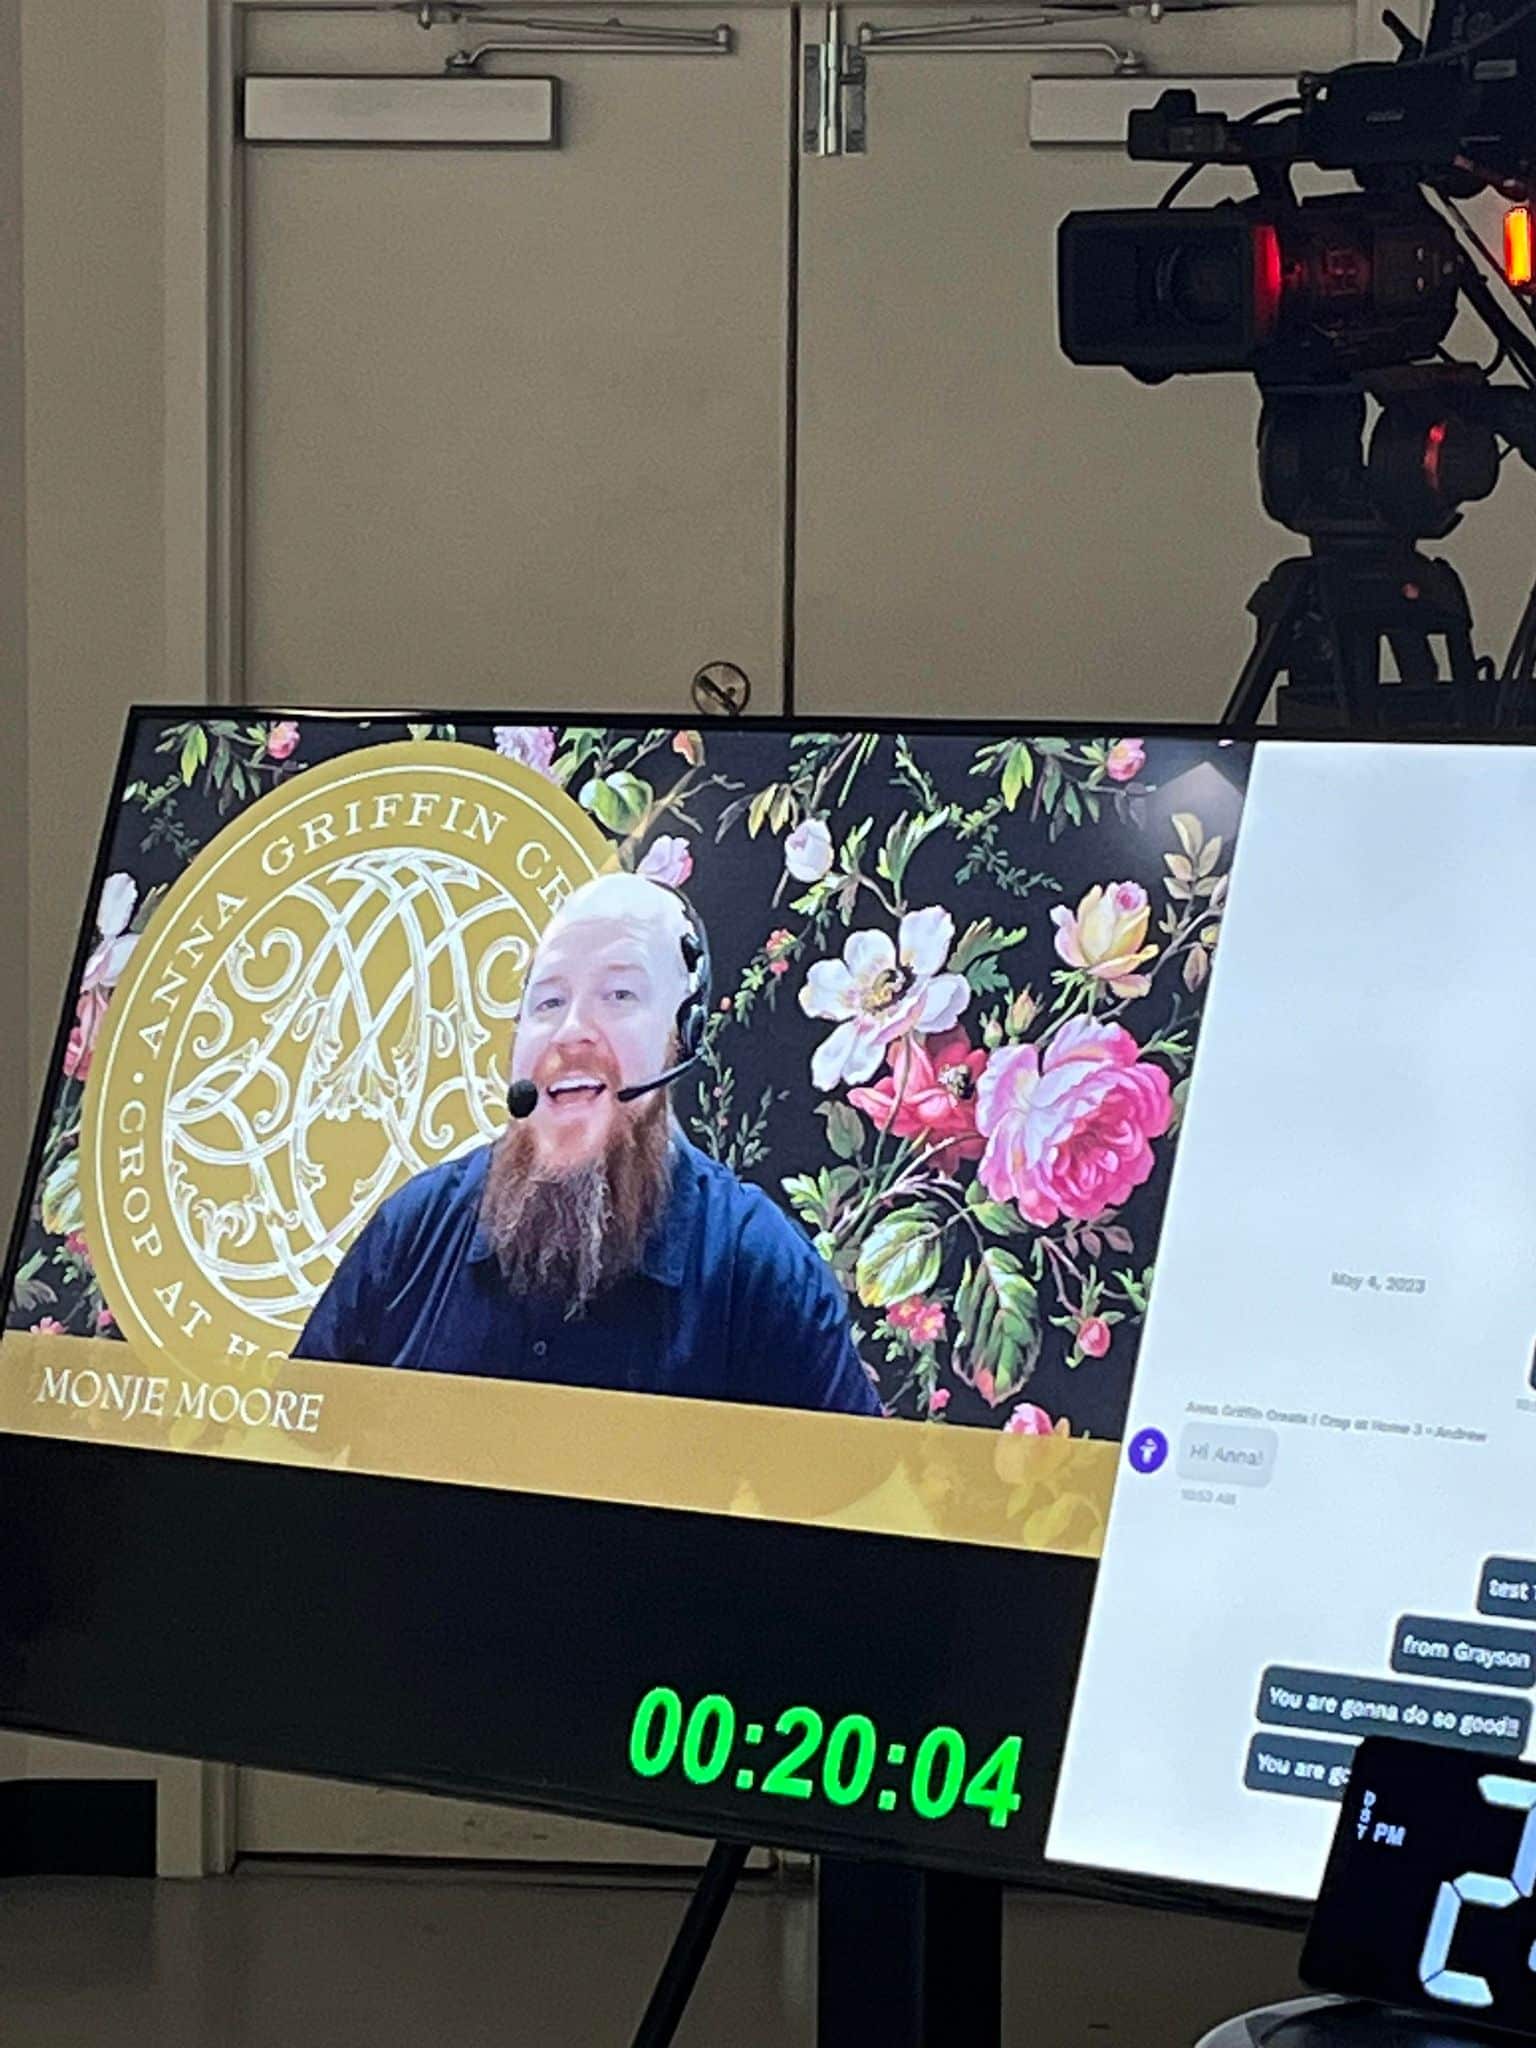 a television screen with a picture of a bearded man on it.